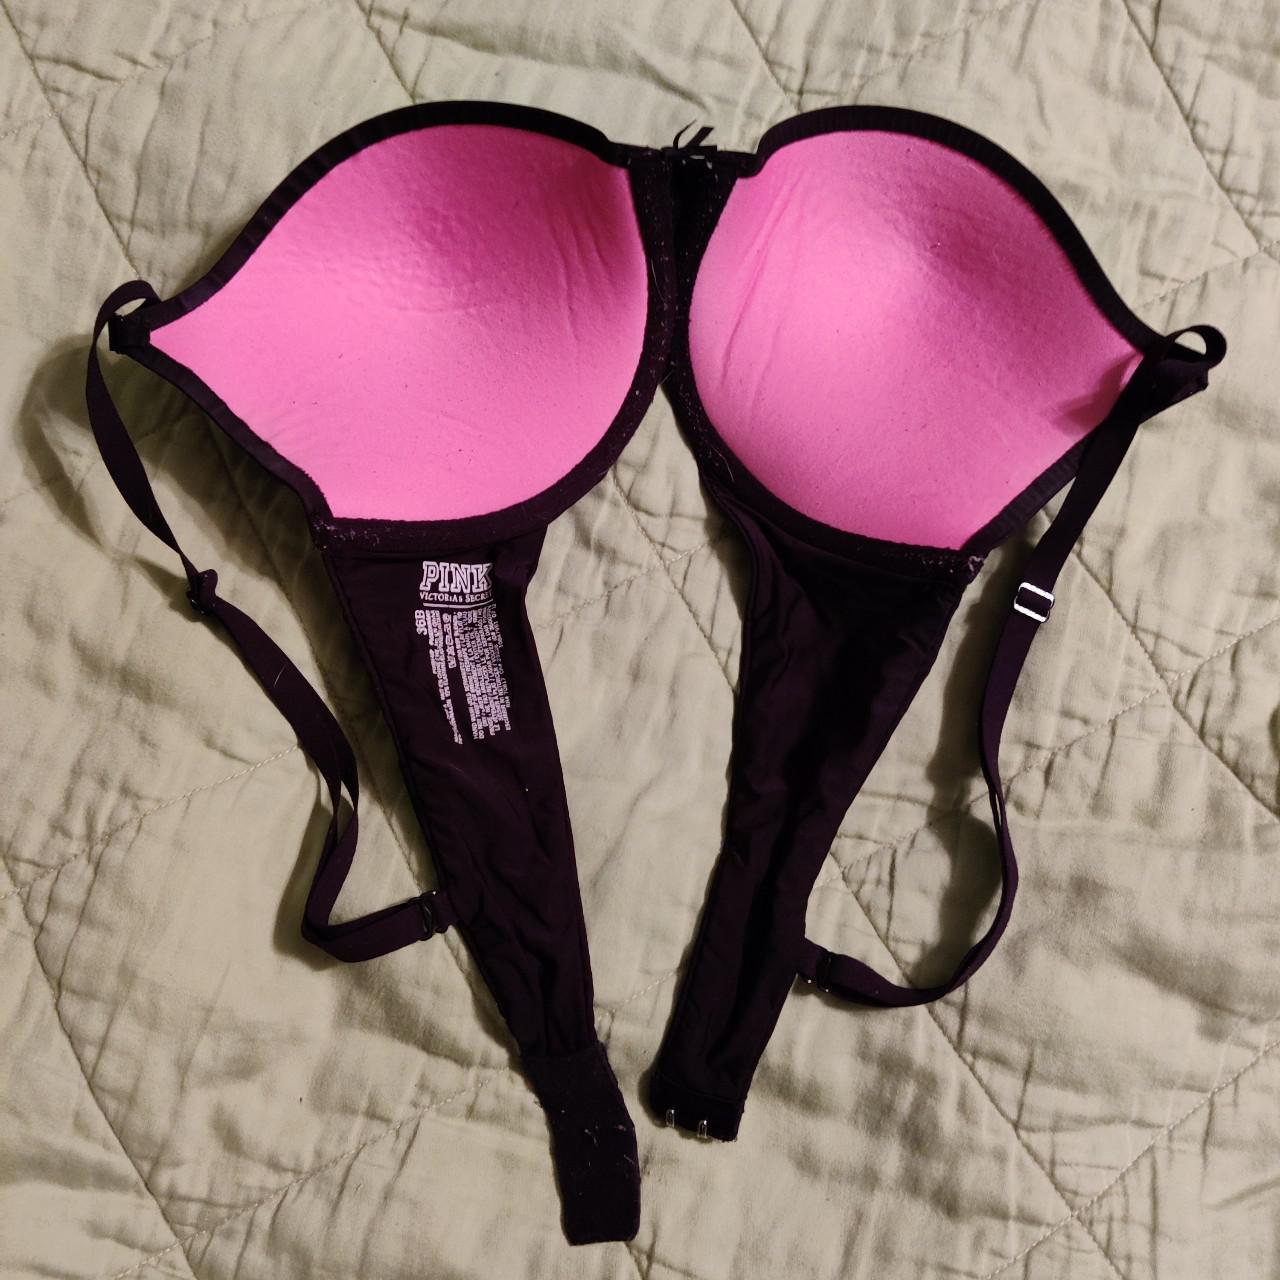 red PINK bra size 36B please see photos for flaws - Depop